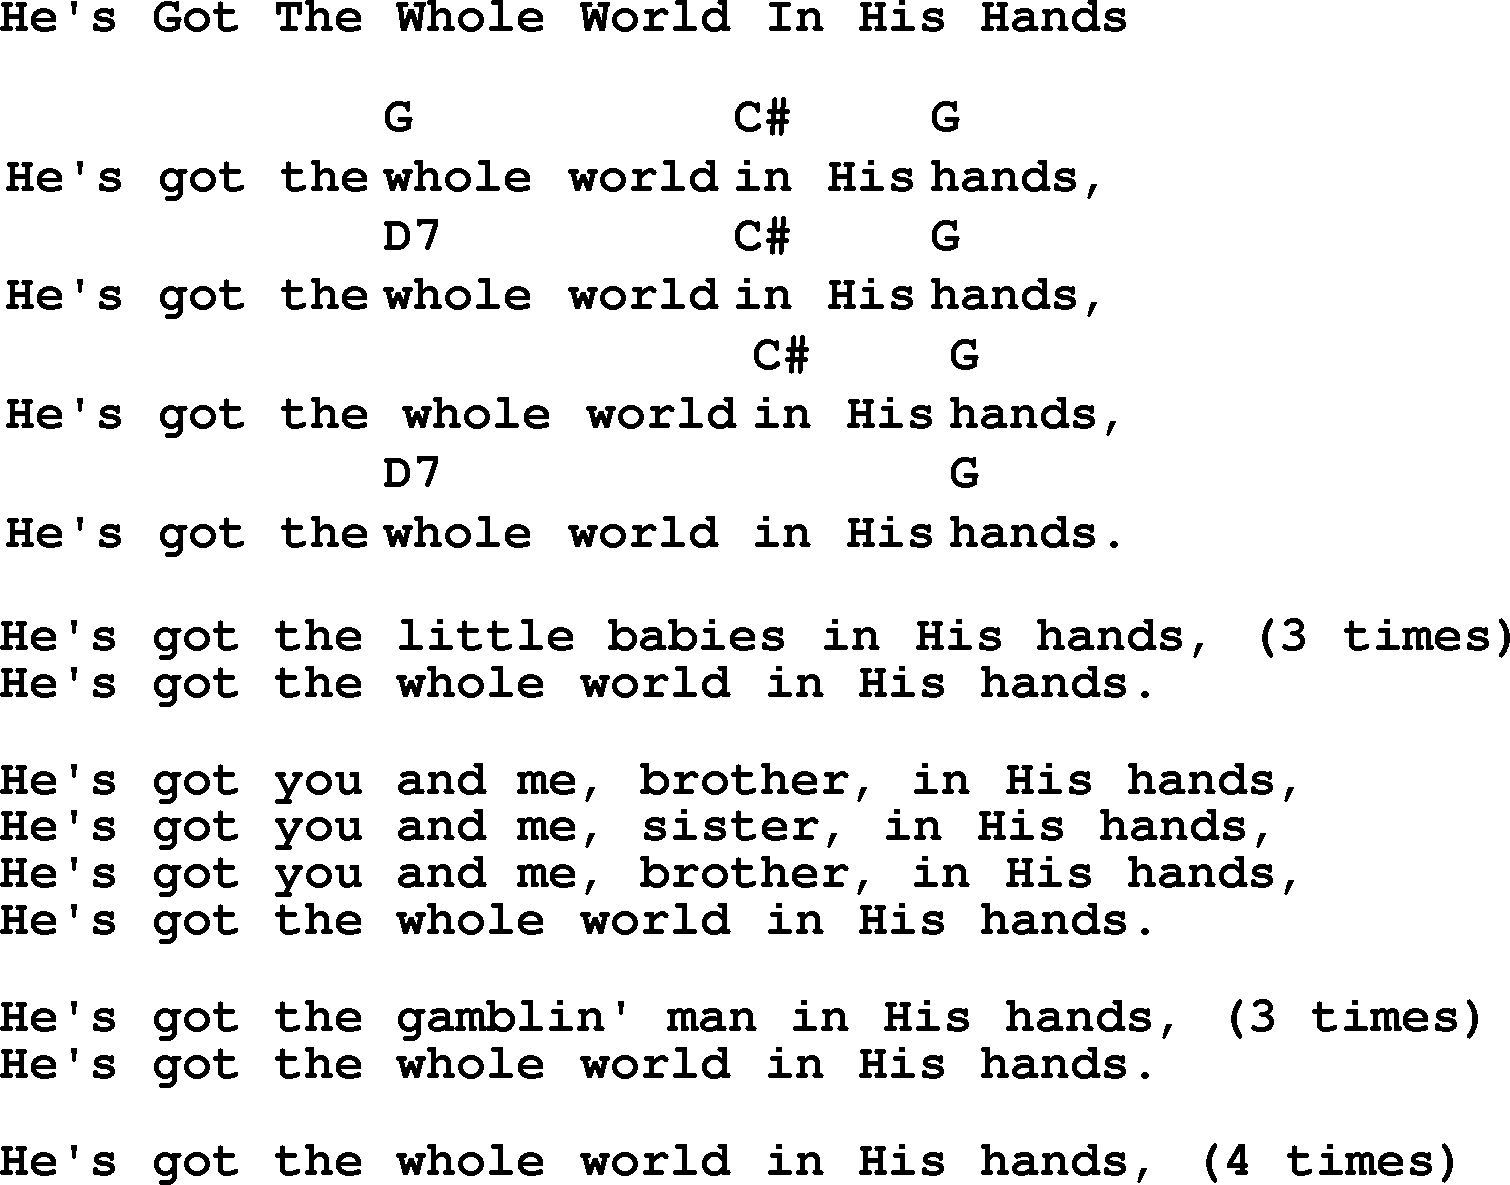 Top 1000 Most Popular Folk and Old-time Songs: Hes Got The Whole World In His Hands, lyrics and chords